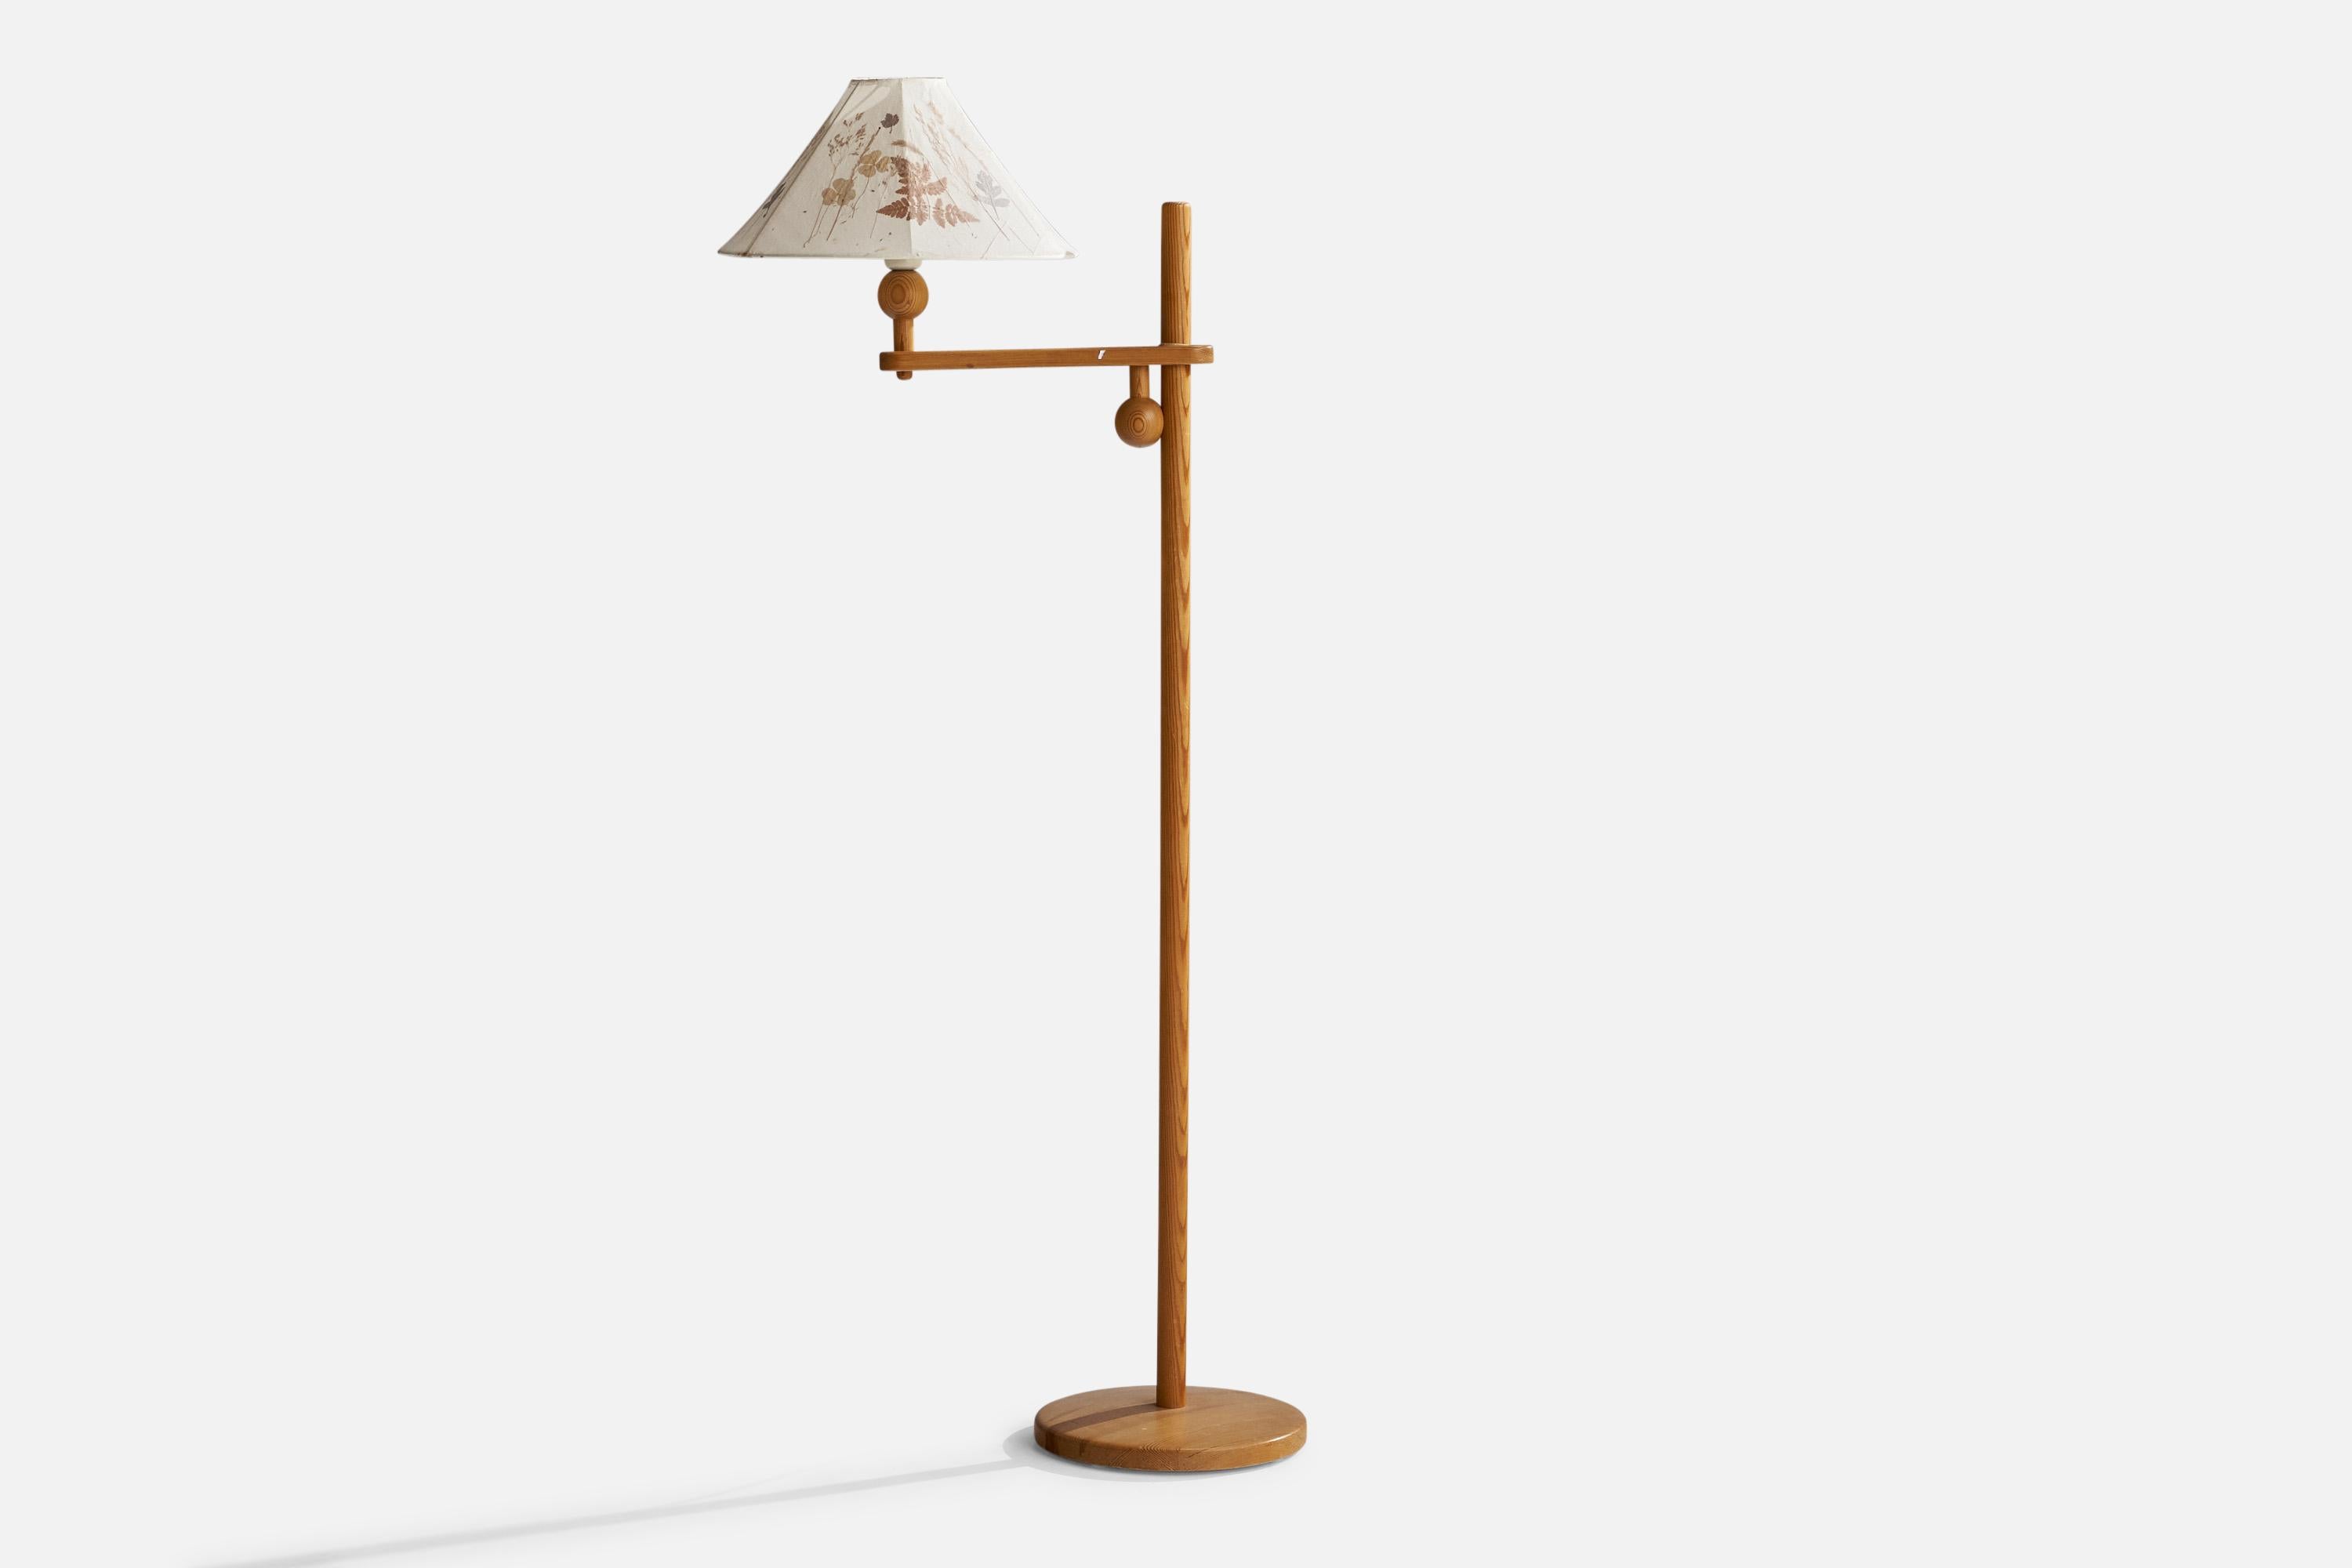 An adjustable pine and floral-printed paper floor lamp designed by Yngve Ekström, Sweden, 1970s.

Overall Dimensions (inches): 53” H x 14” W x 23” D
Stated dimensions include shade.
Bulb Specifications: E-26 Bulb
Number of Sockets: 1
All lighting